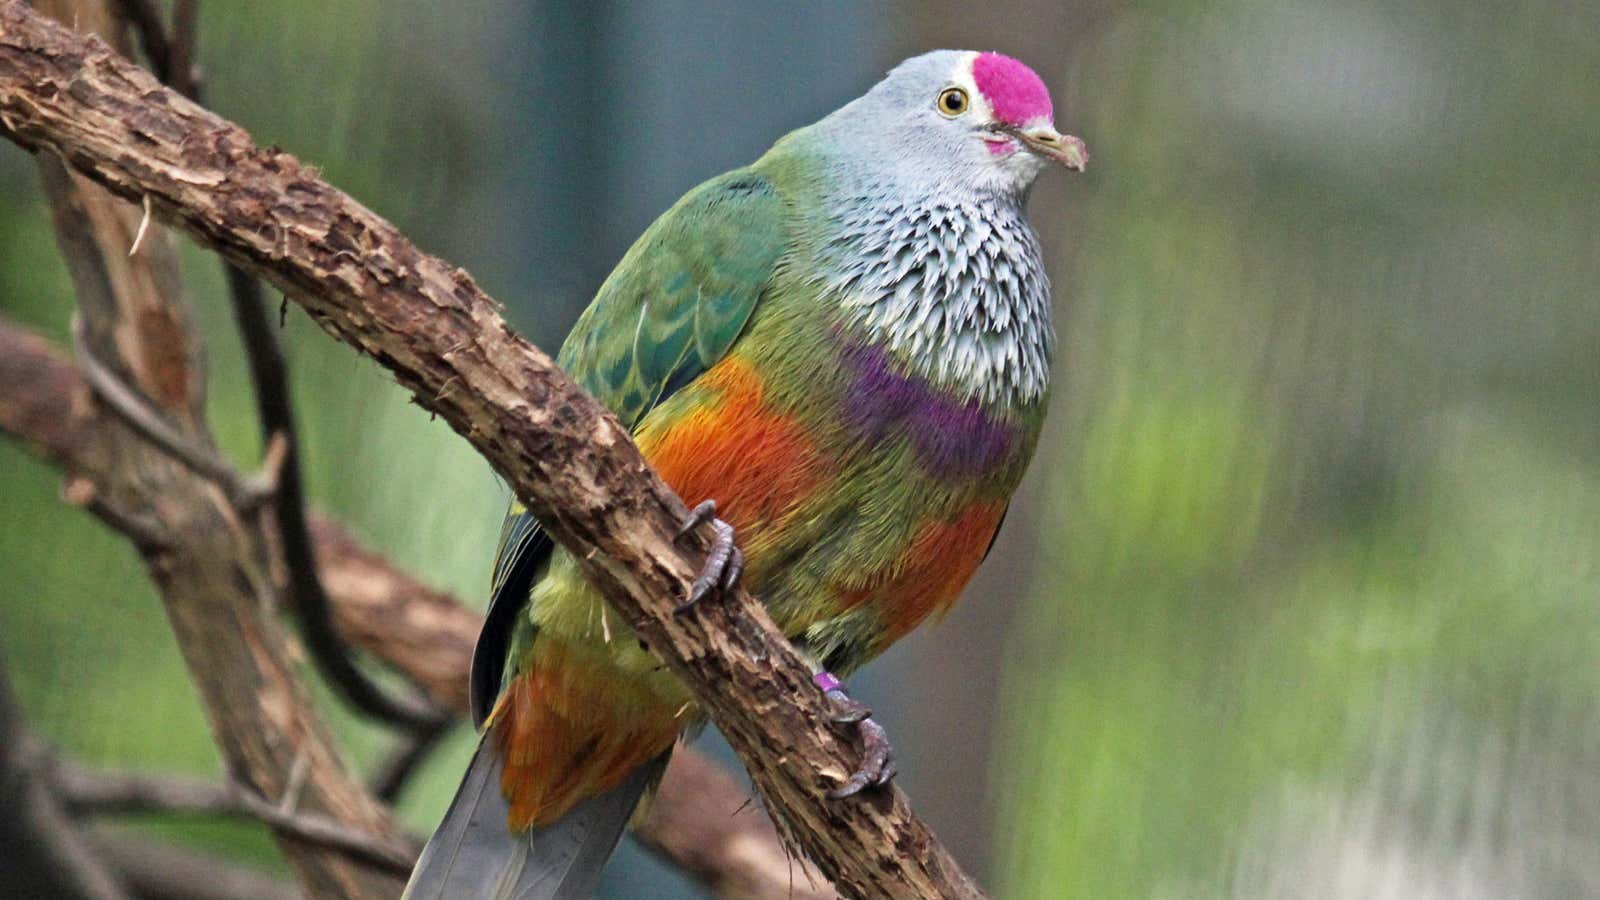 The Mariana fruit dove is native to Guam, but it can no longer be found there.